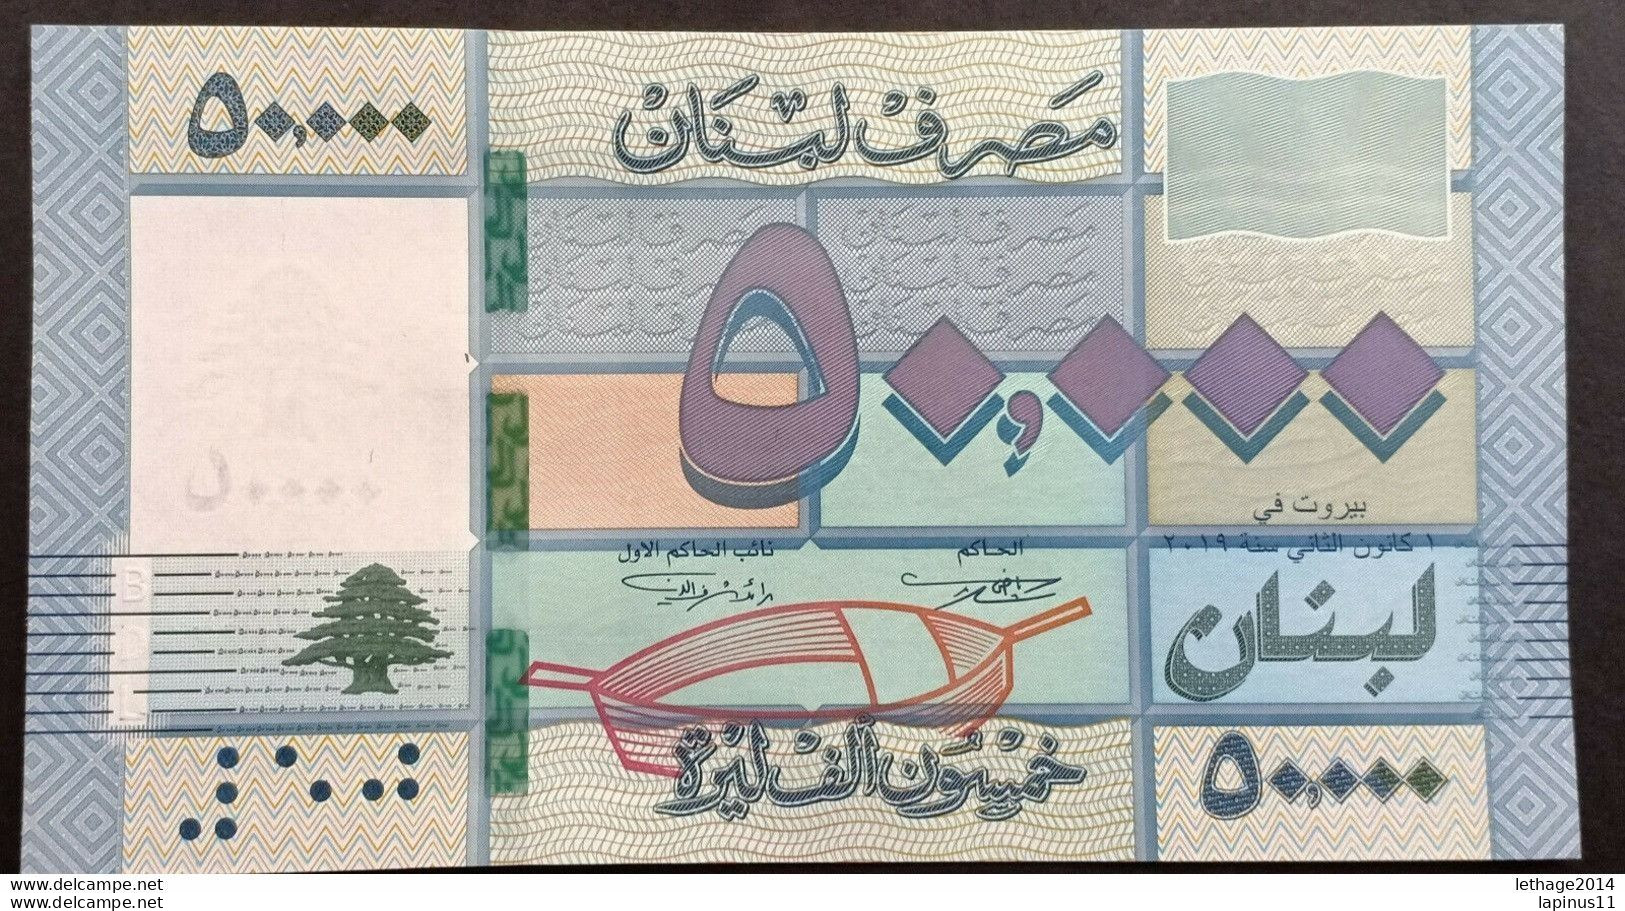 Just Issued, Lebanon 50000 Livres 2019 UNC New EARLY RELEASE Banknote Prefix D0 - Jordania